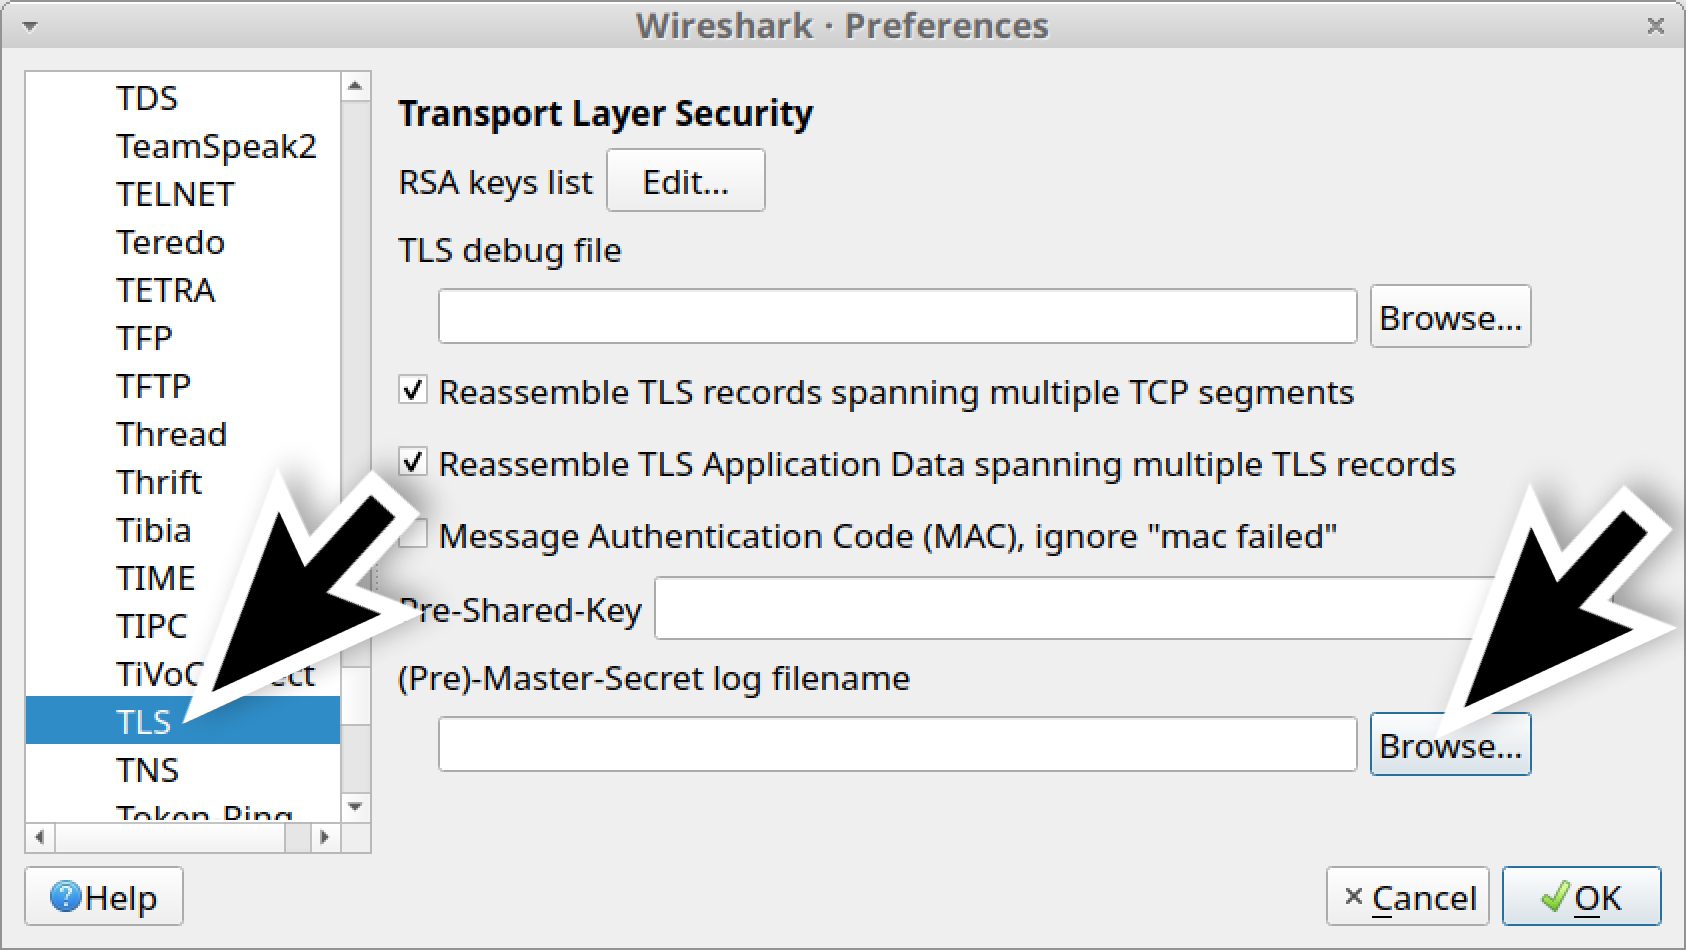 Once you have selected TLS in Wireshark 3.x, you should see a line for (Pre)-Master-Secret log filename. 